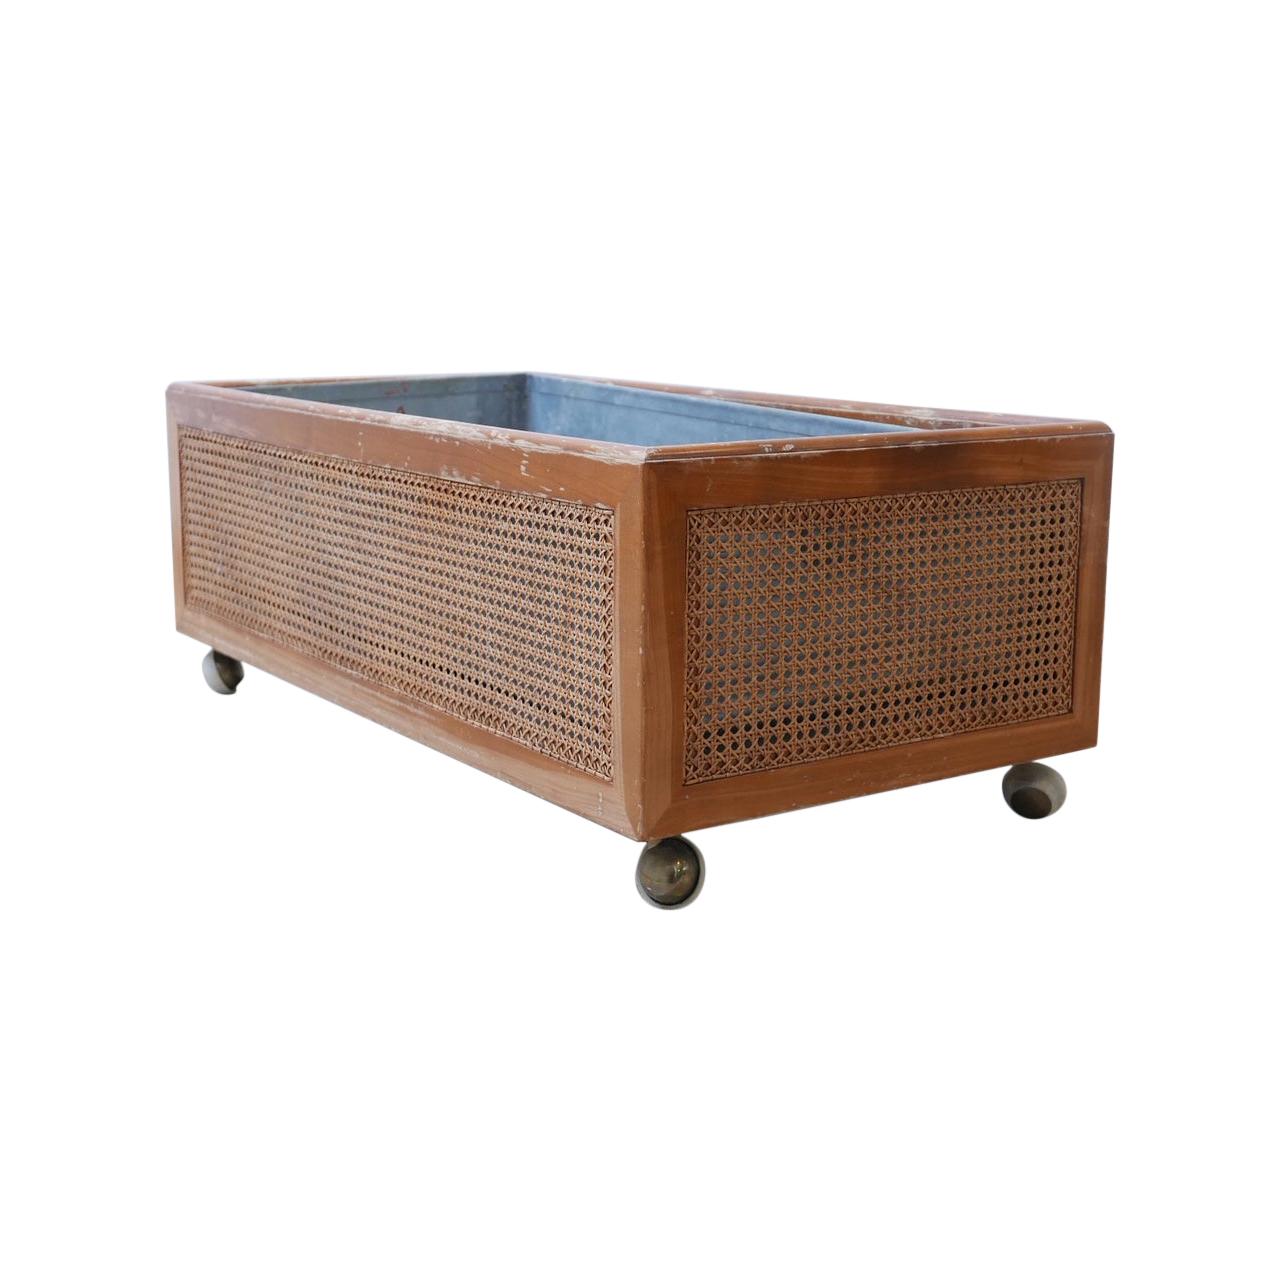 French Midcentury Rattan Internal Planter For Sale